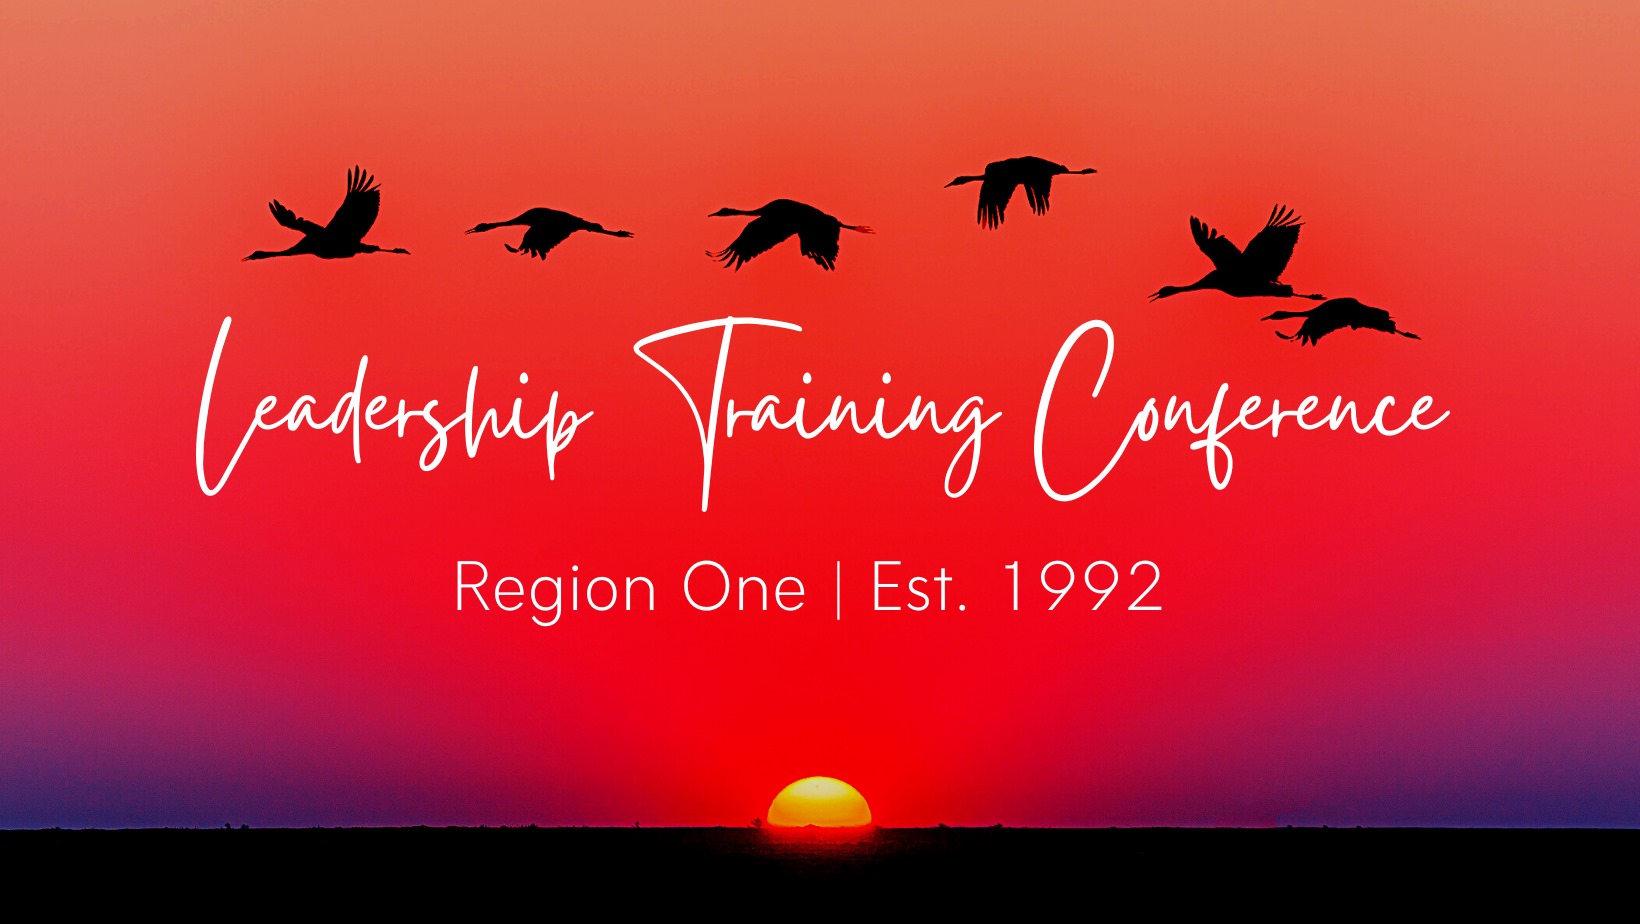 Leadership Training Conference